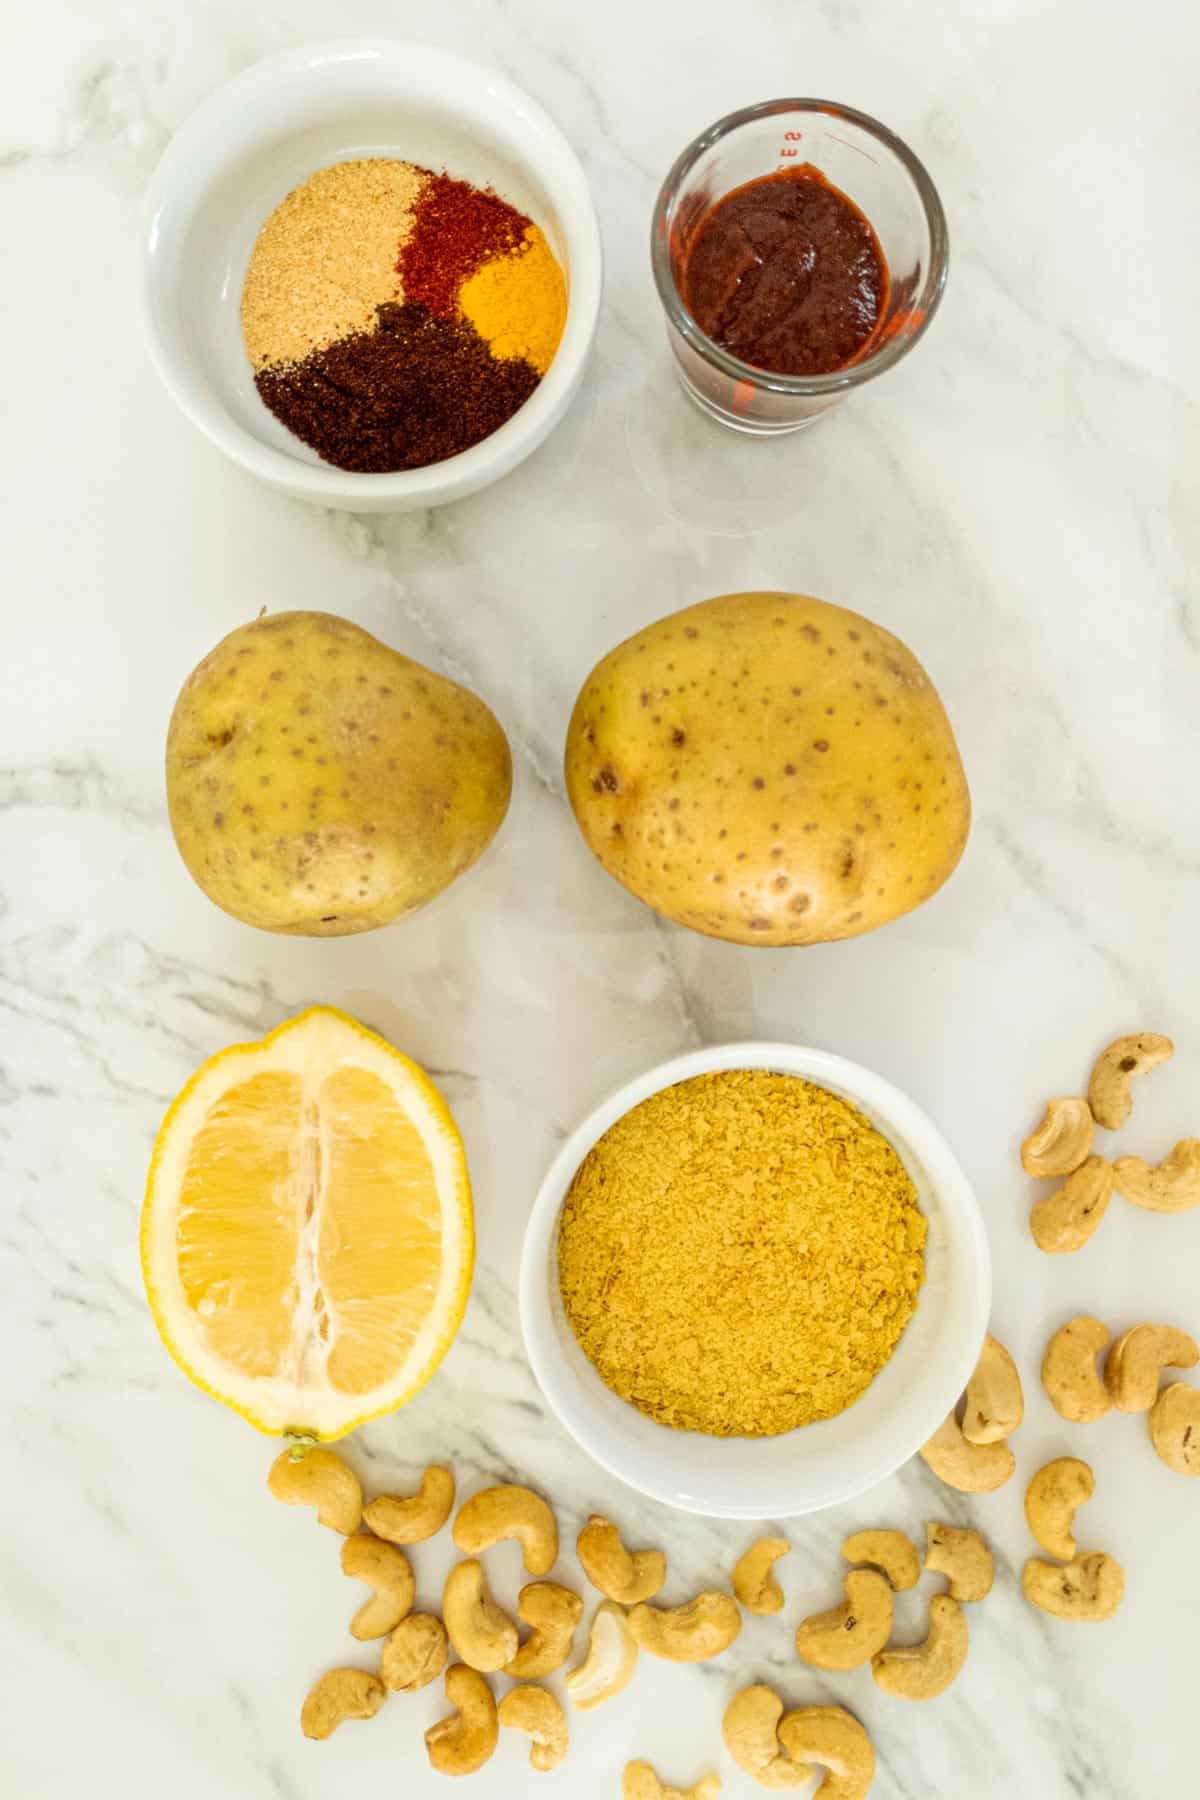 Two potatoes, dish of spices, dish or nutritional yeast, half a lemon, and scattered cashews on a marble counter.